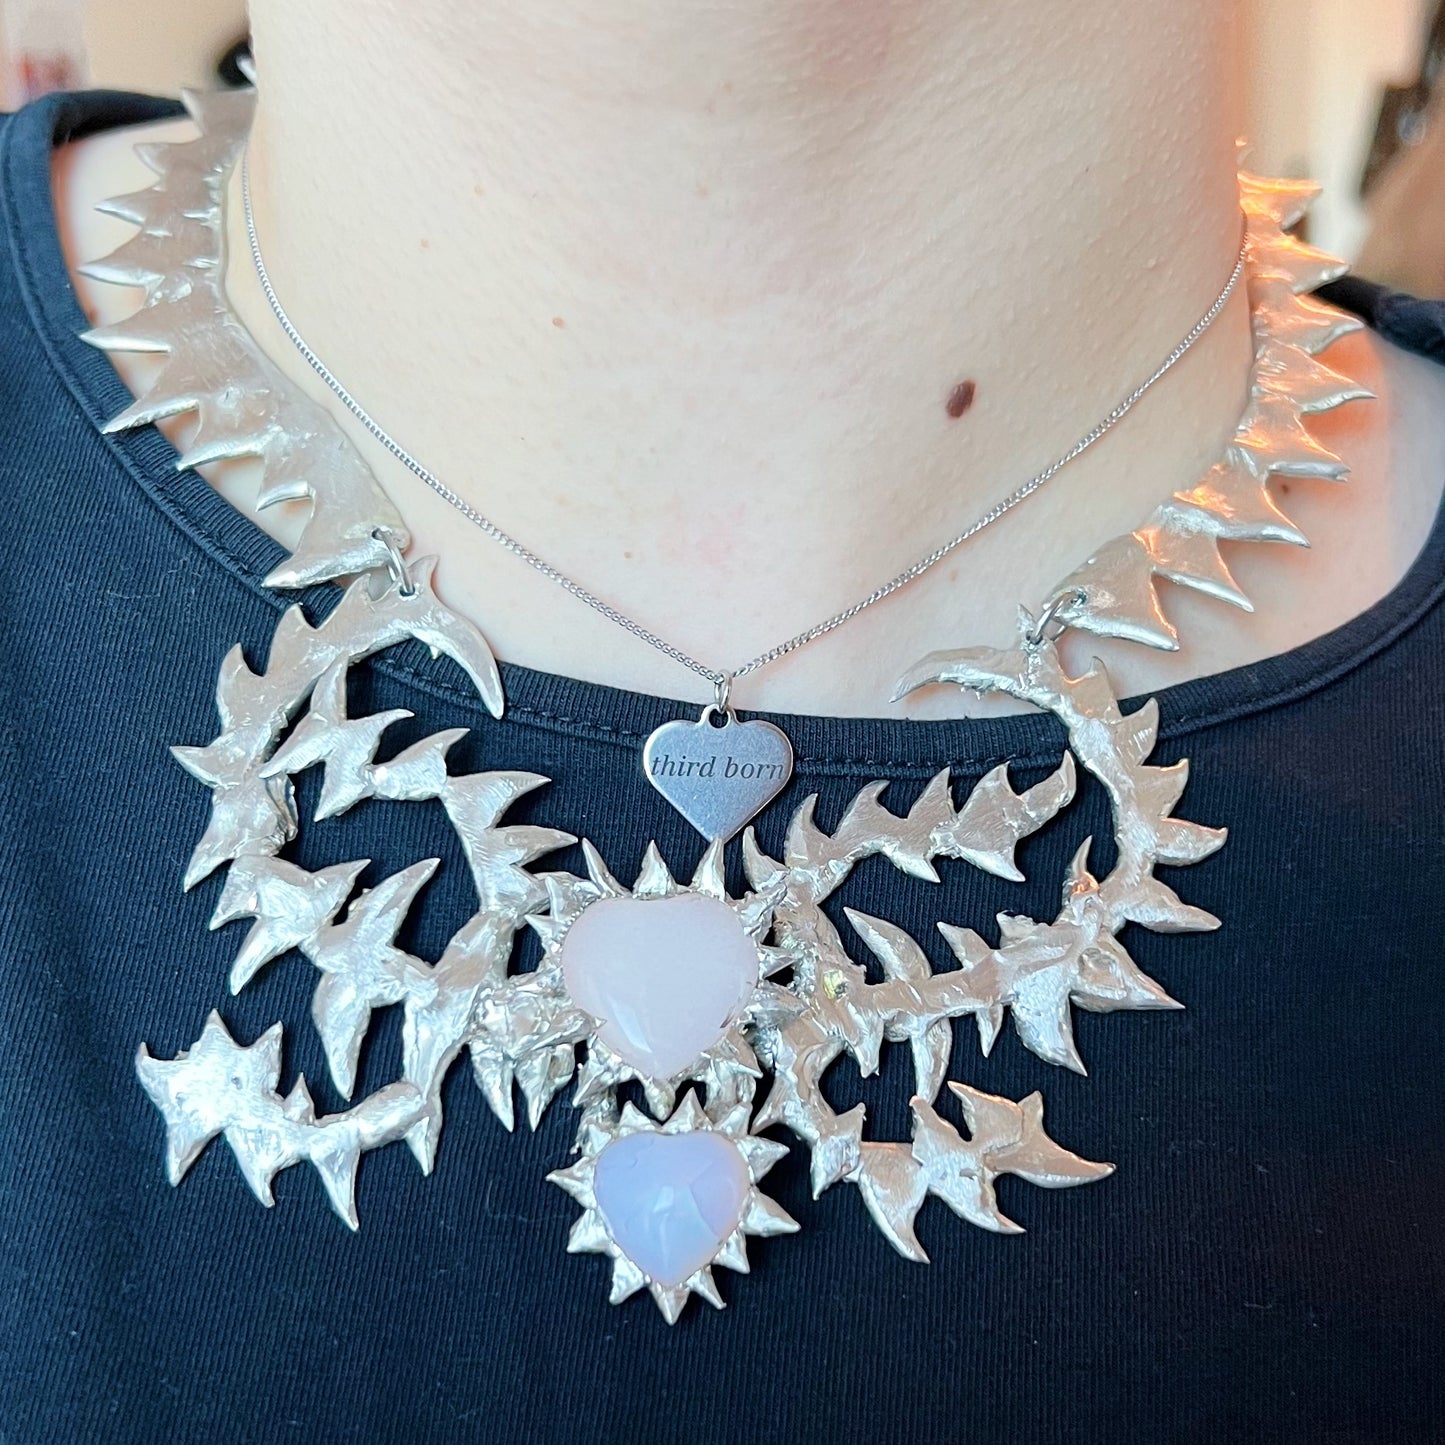 The Angel Necklace